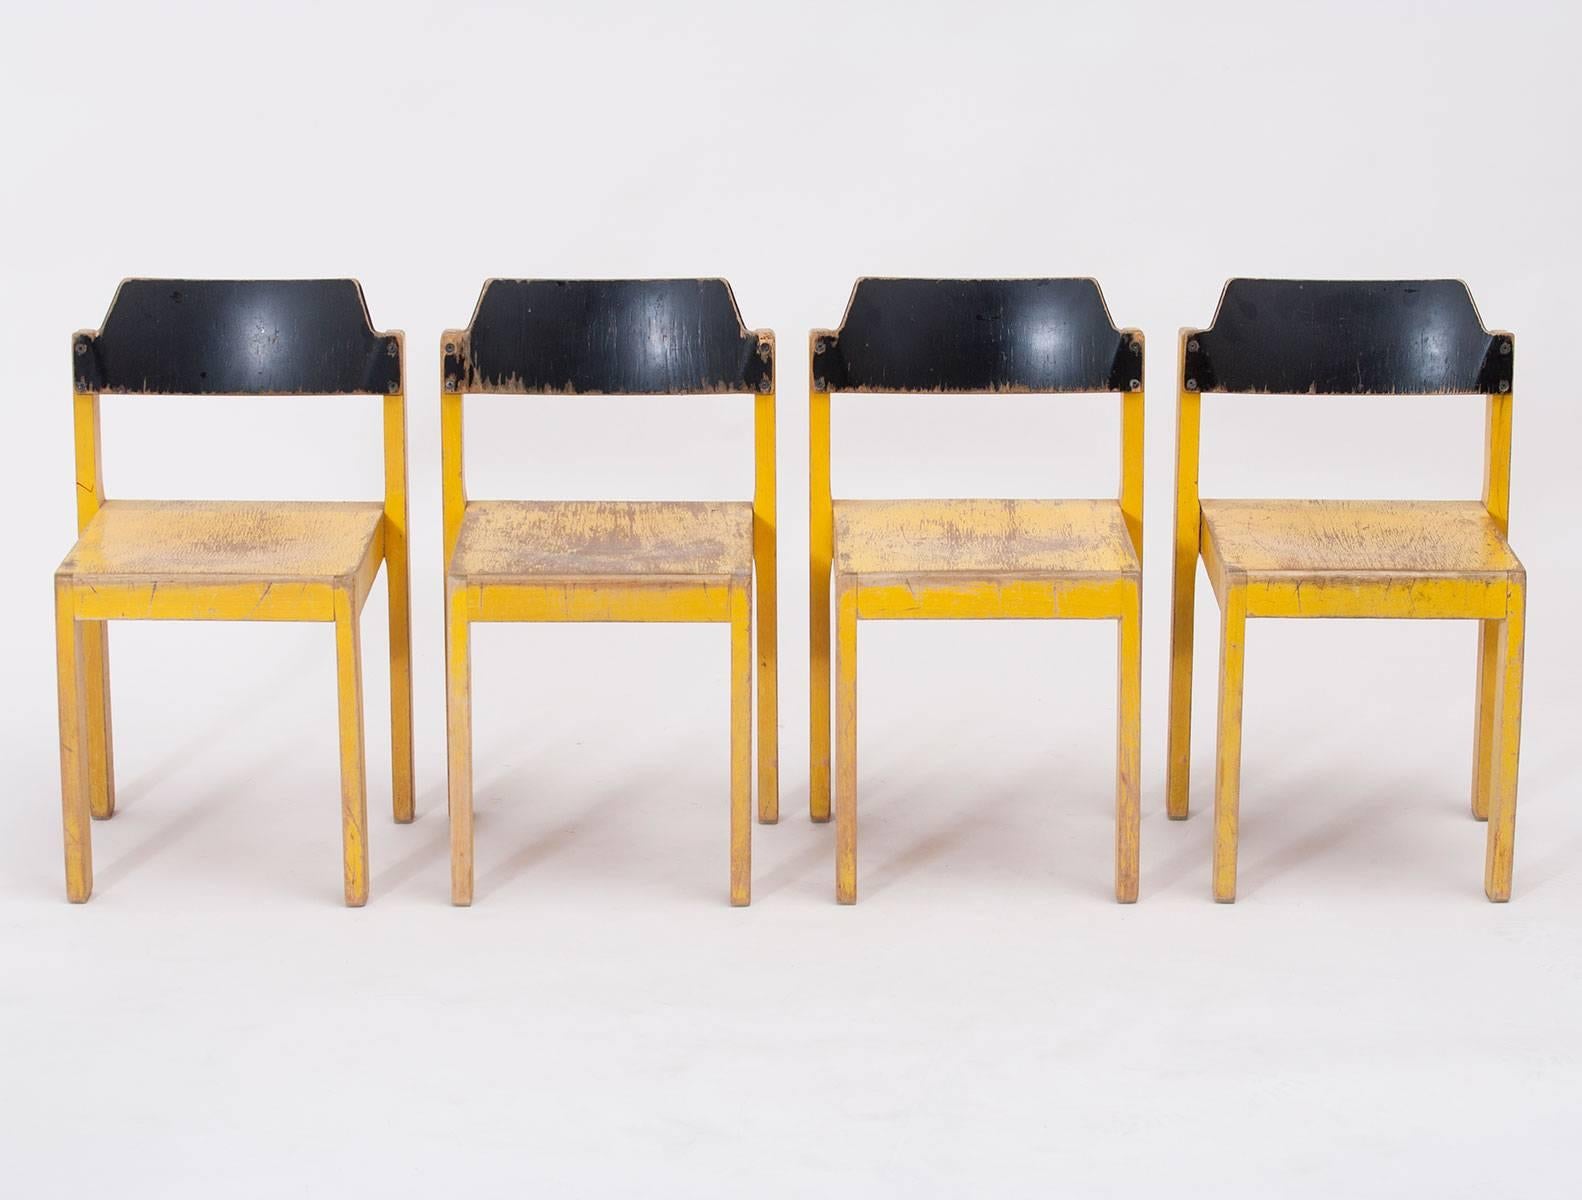 Set of four stacking wooden children's chairs, aniline-dyed osage yellow and black; well-constructed and beautifully aged. Made in Germany in the 1950s by an unknown designer.